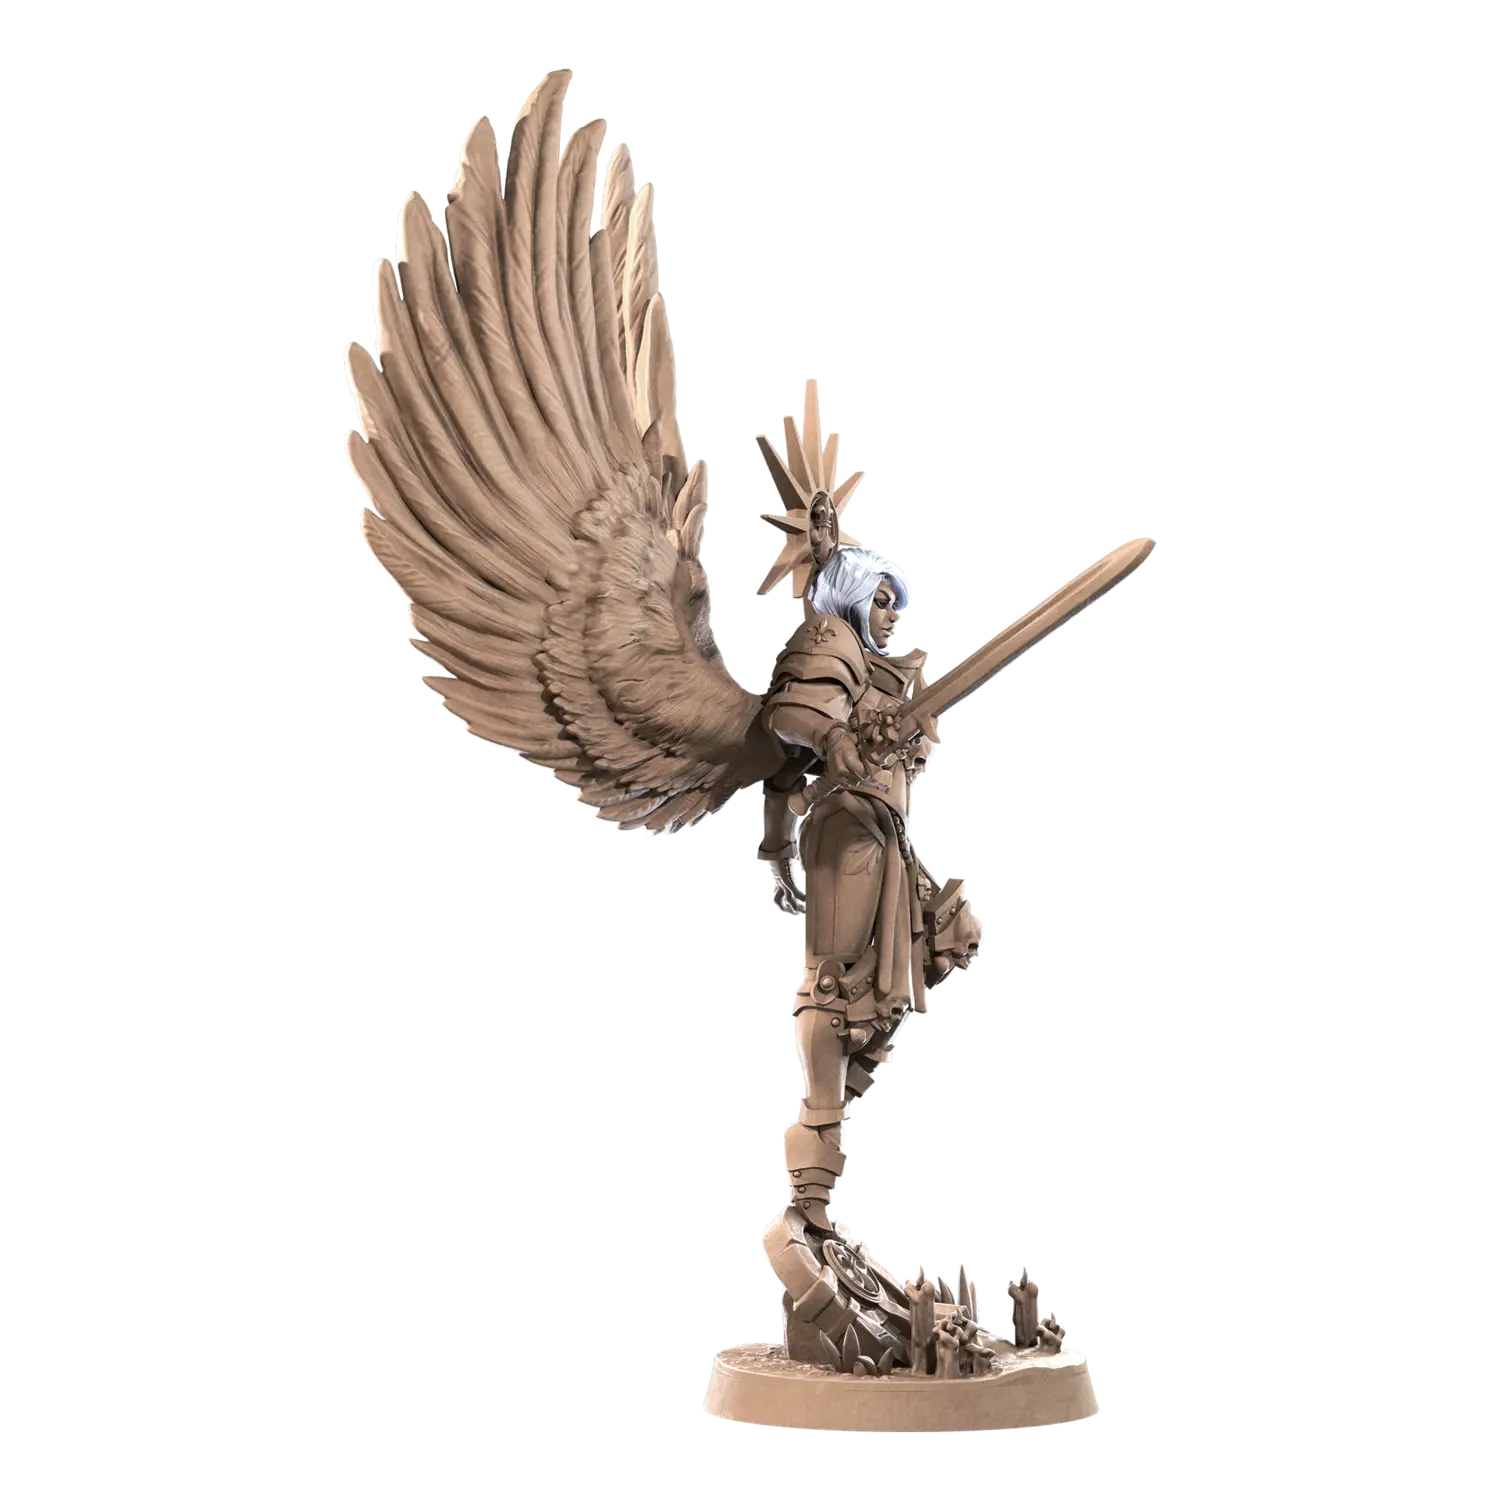 DnD Angel - Battle Sisters - Fighter - Human - Miniature - Paladin Evangeline 01 Angel - Battle Sisters - Fighter - Human - Miniature - Paladin sold by DoubleHitShop